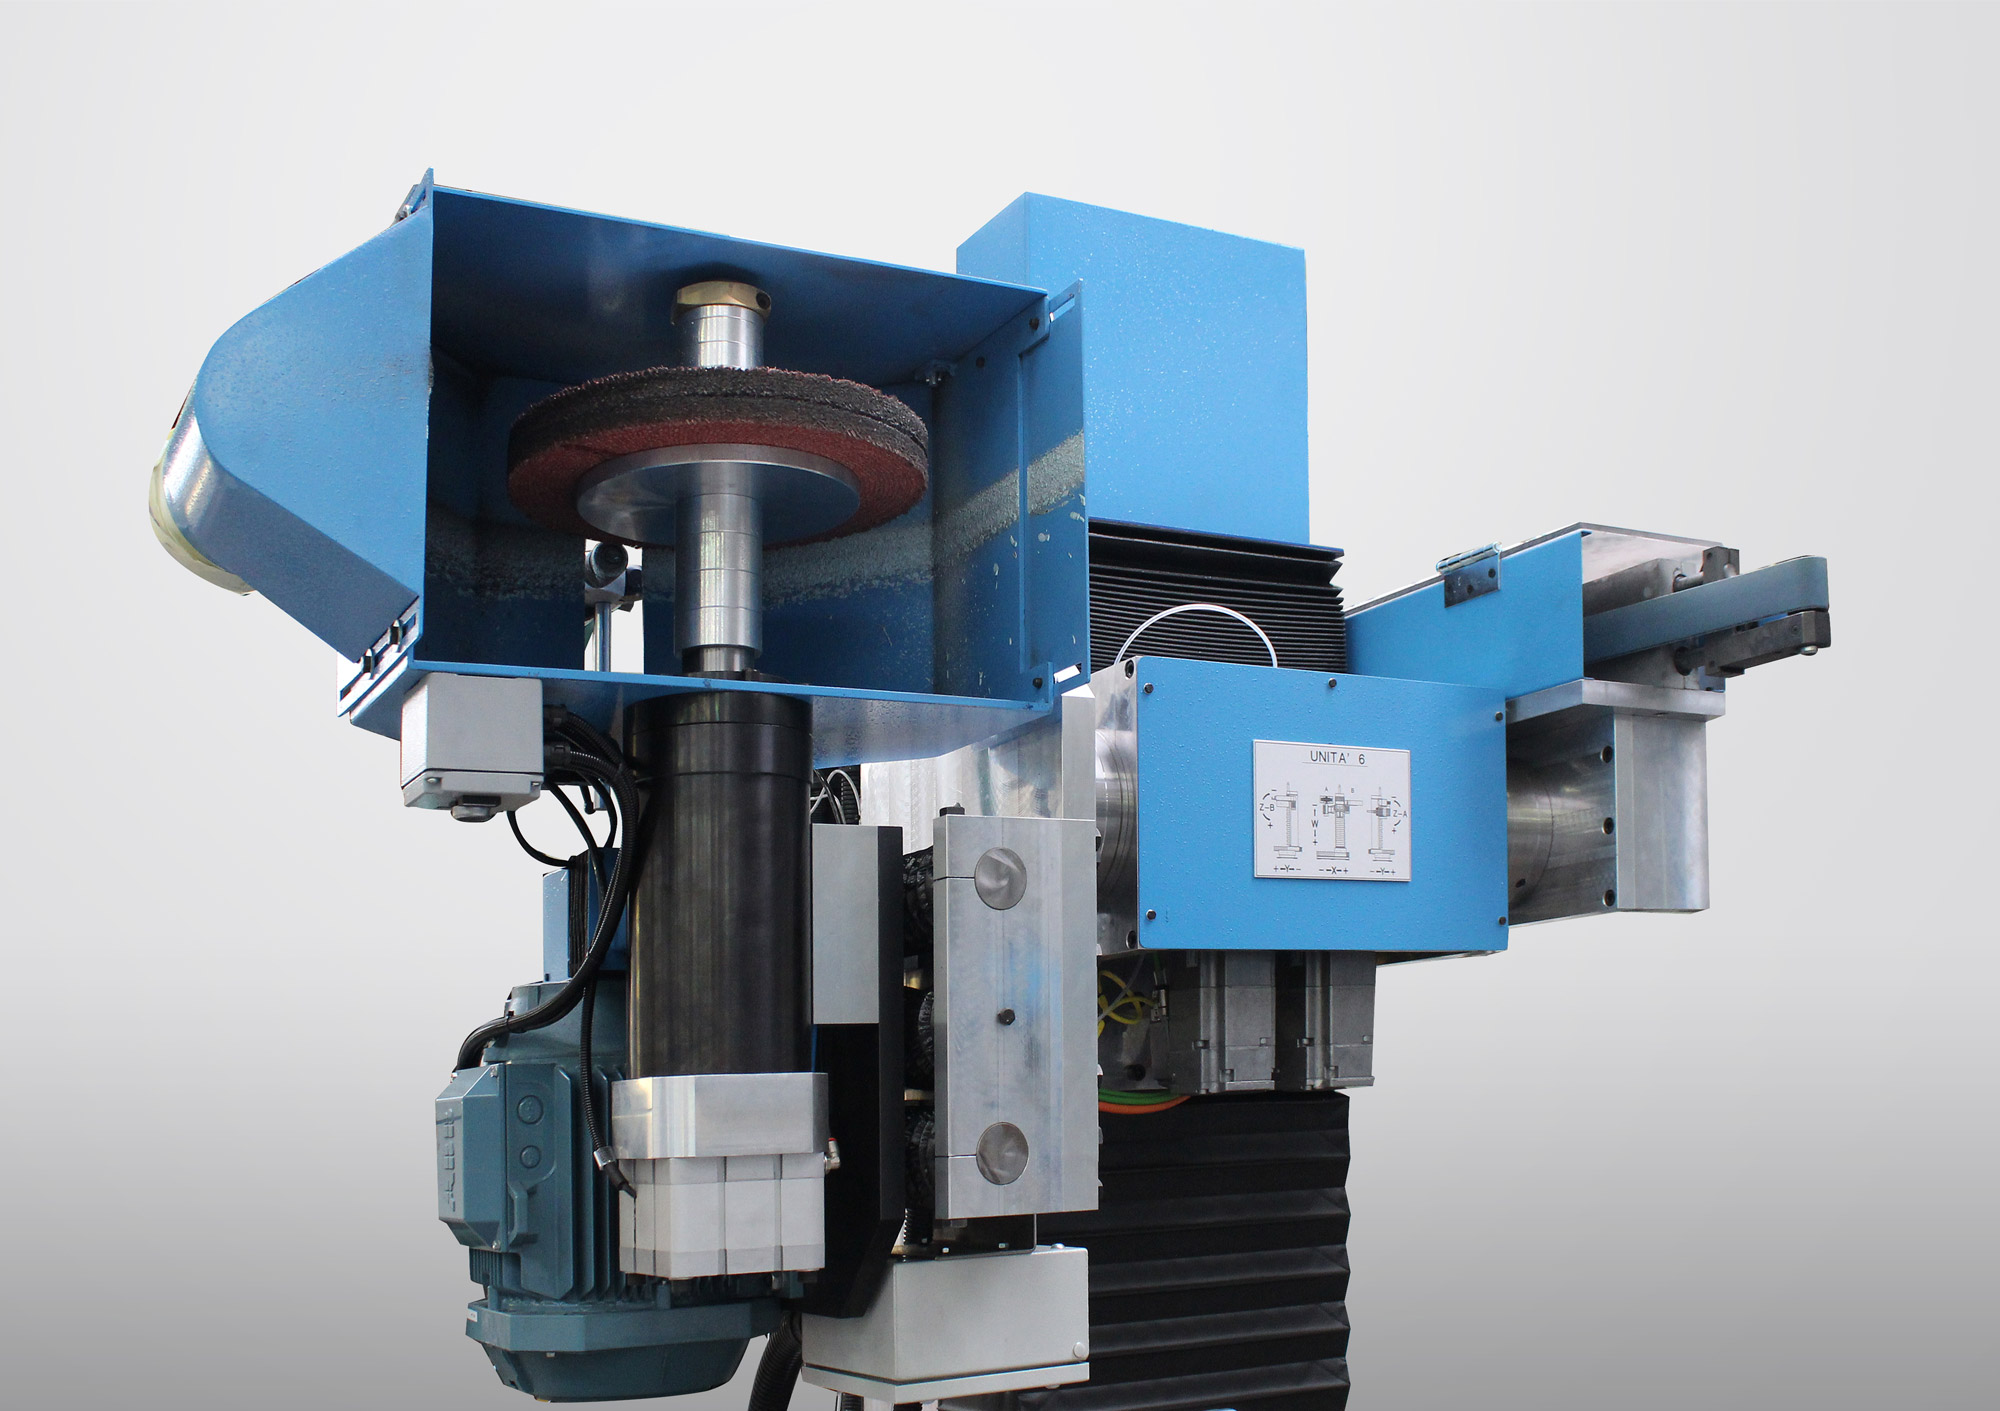 TR+CNC +CNCS Indexed rotary table with C.N.C.S. type grinding/linishing unit and C.N.C. type polishing unit